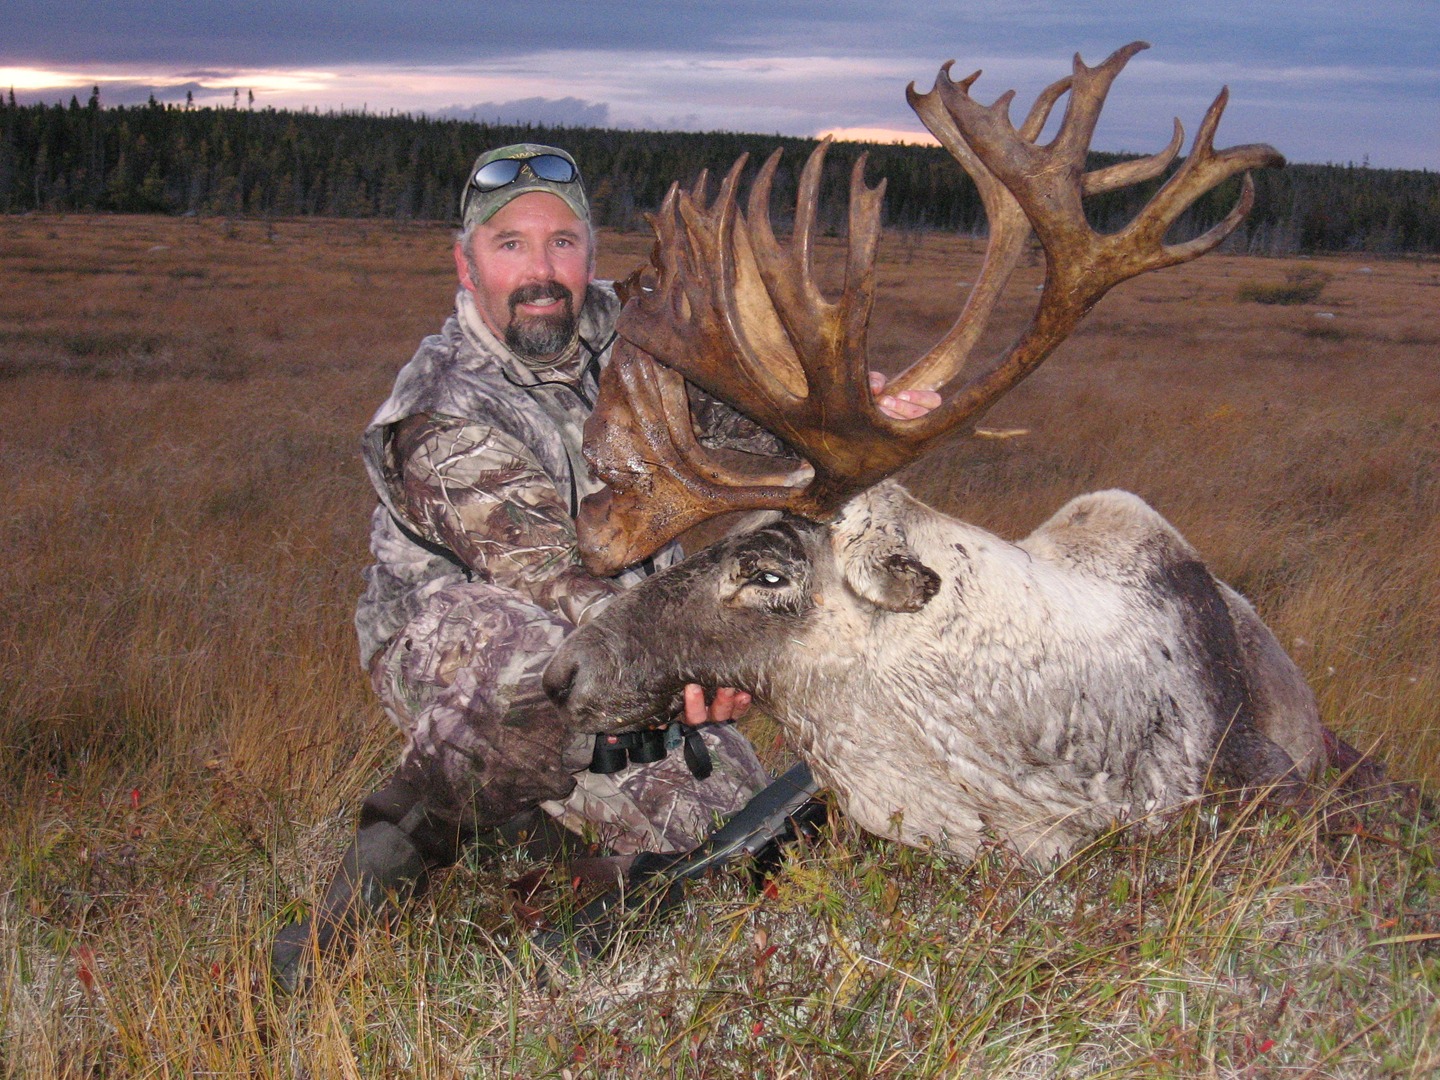 Man wearing camouflage wear with a hunted moose